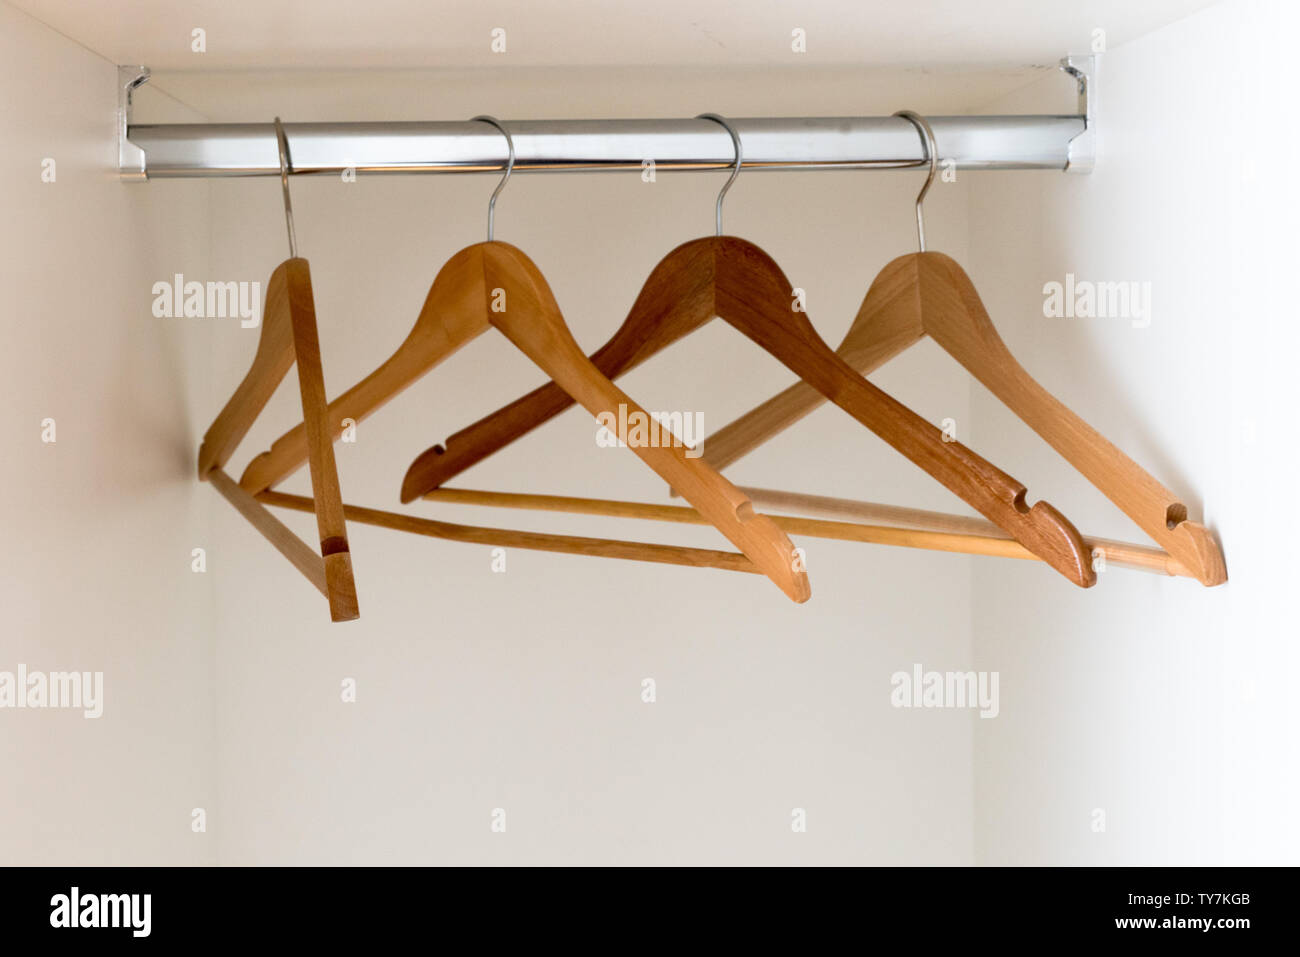 A horizontal detail view of an empty metal coatrack in a white wardrobe with four empty wooden coathangers Stock Photo